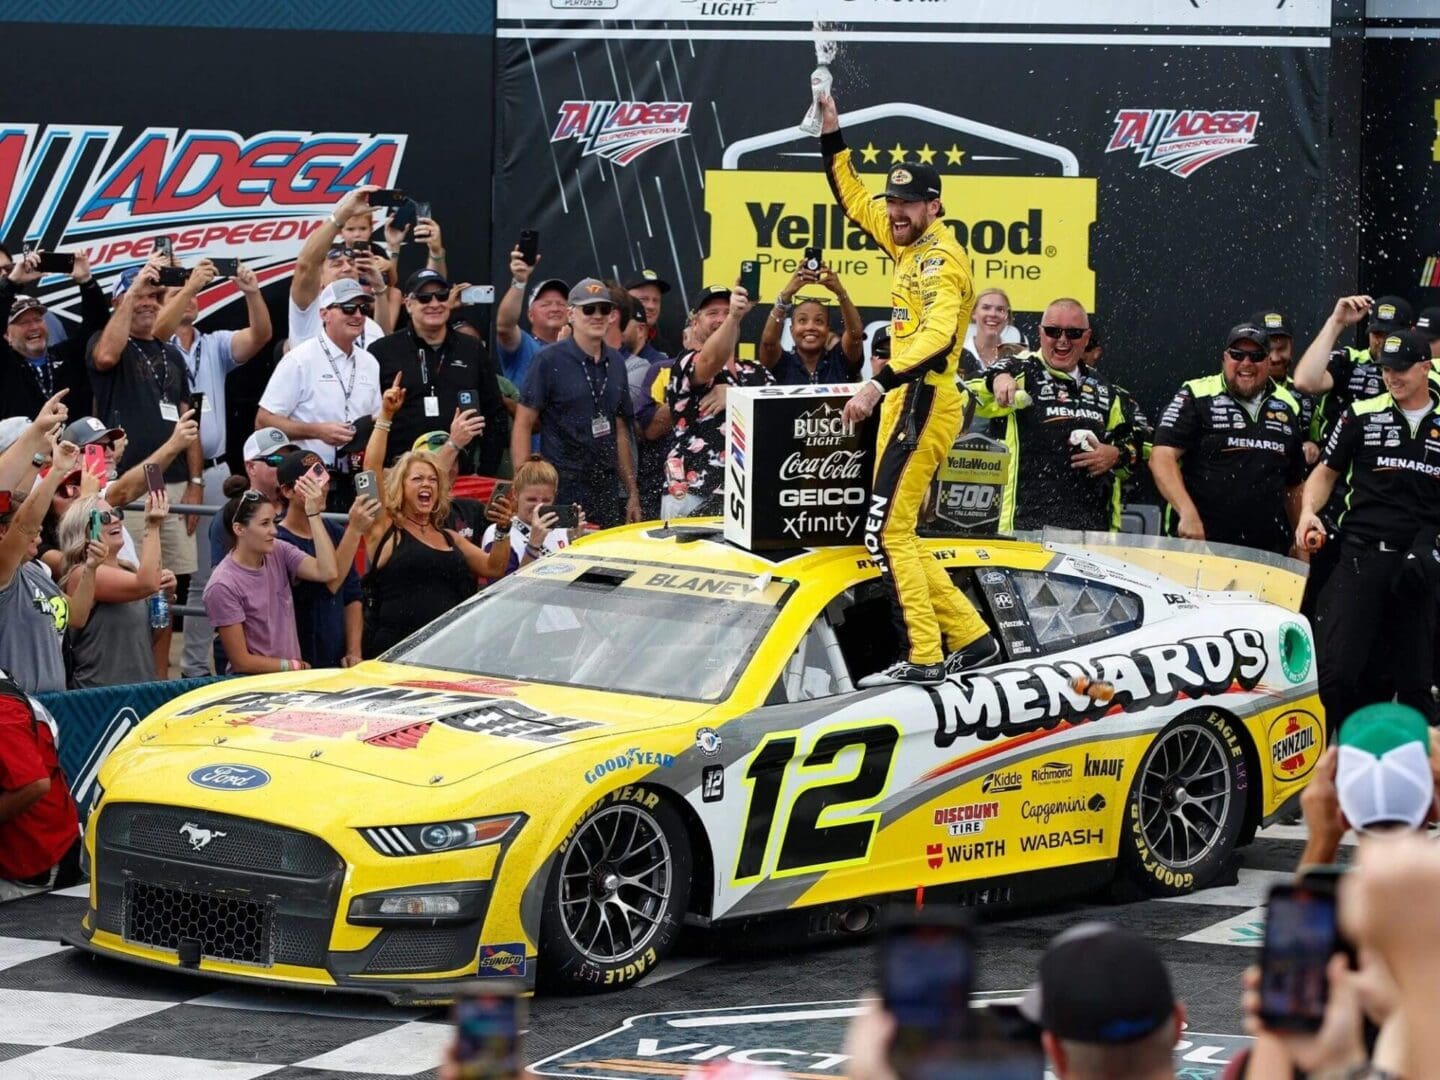 A man in yellow racing suit standing on the hood of a race car.